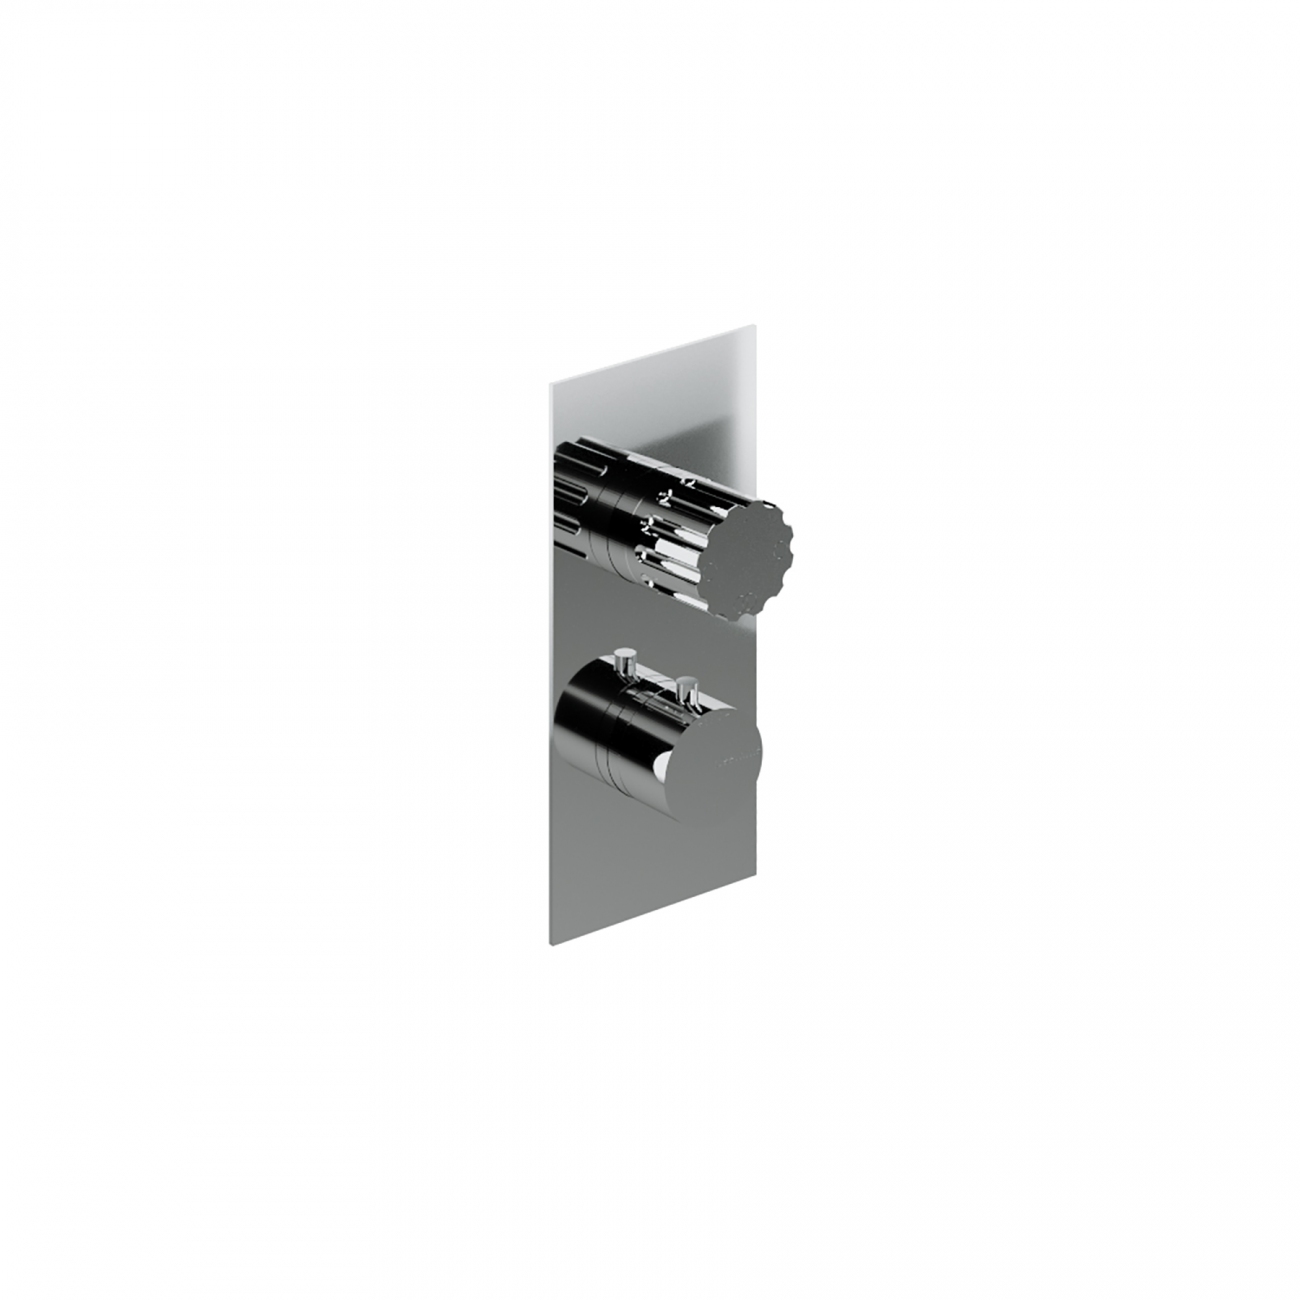 Treemme Ios thermostatic  shower mixer